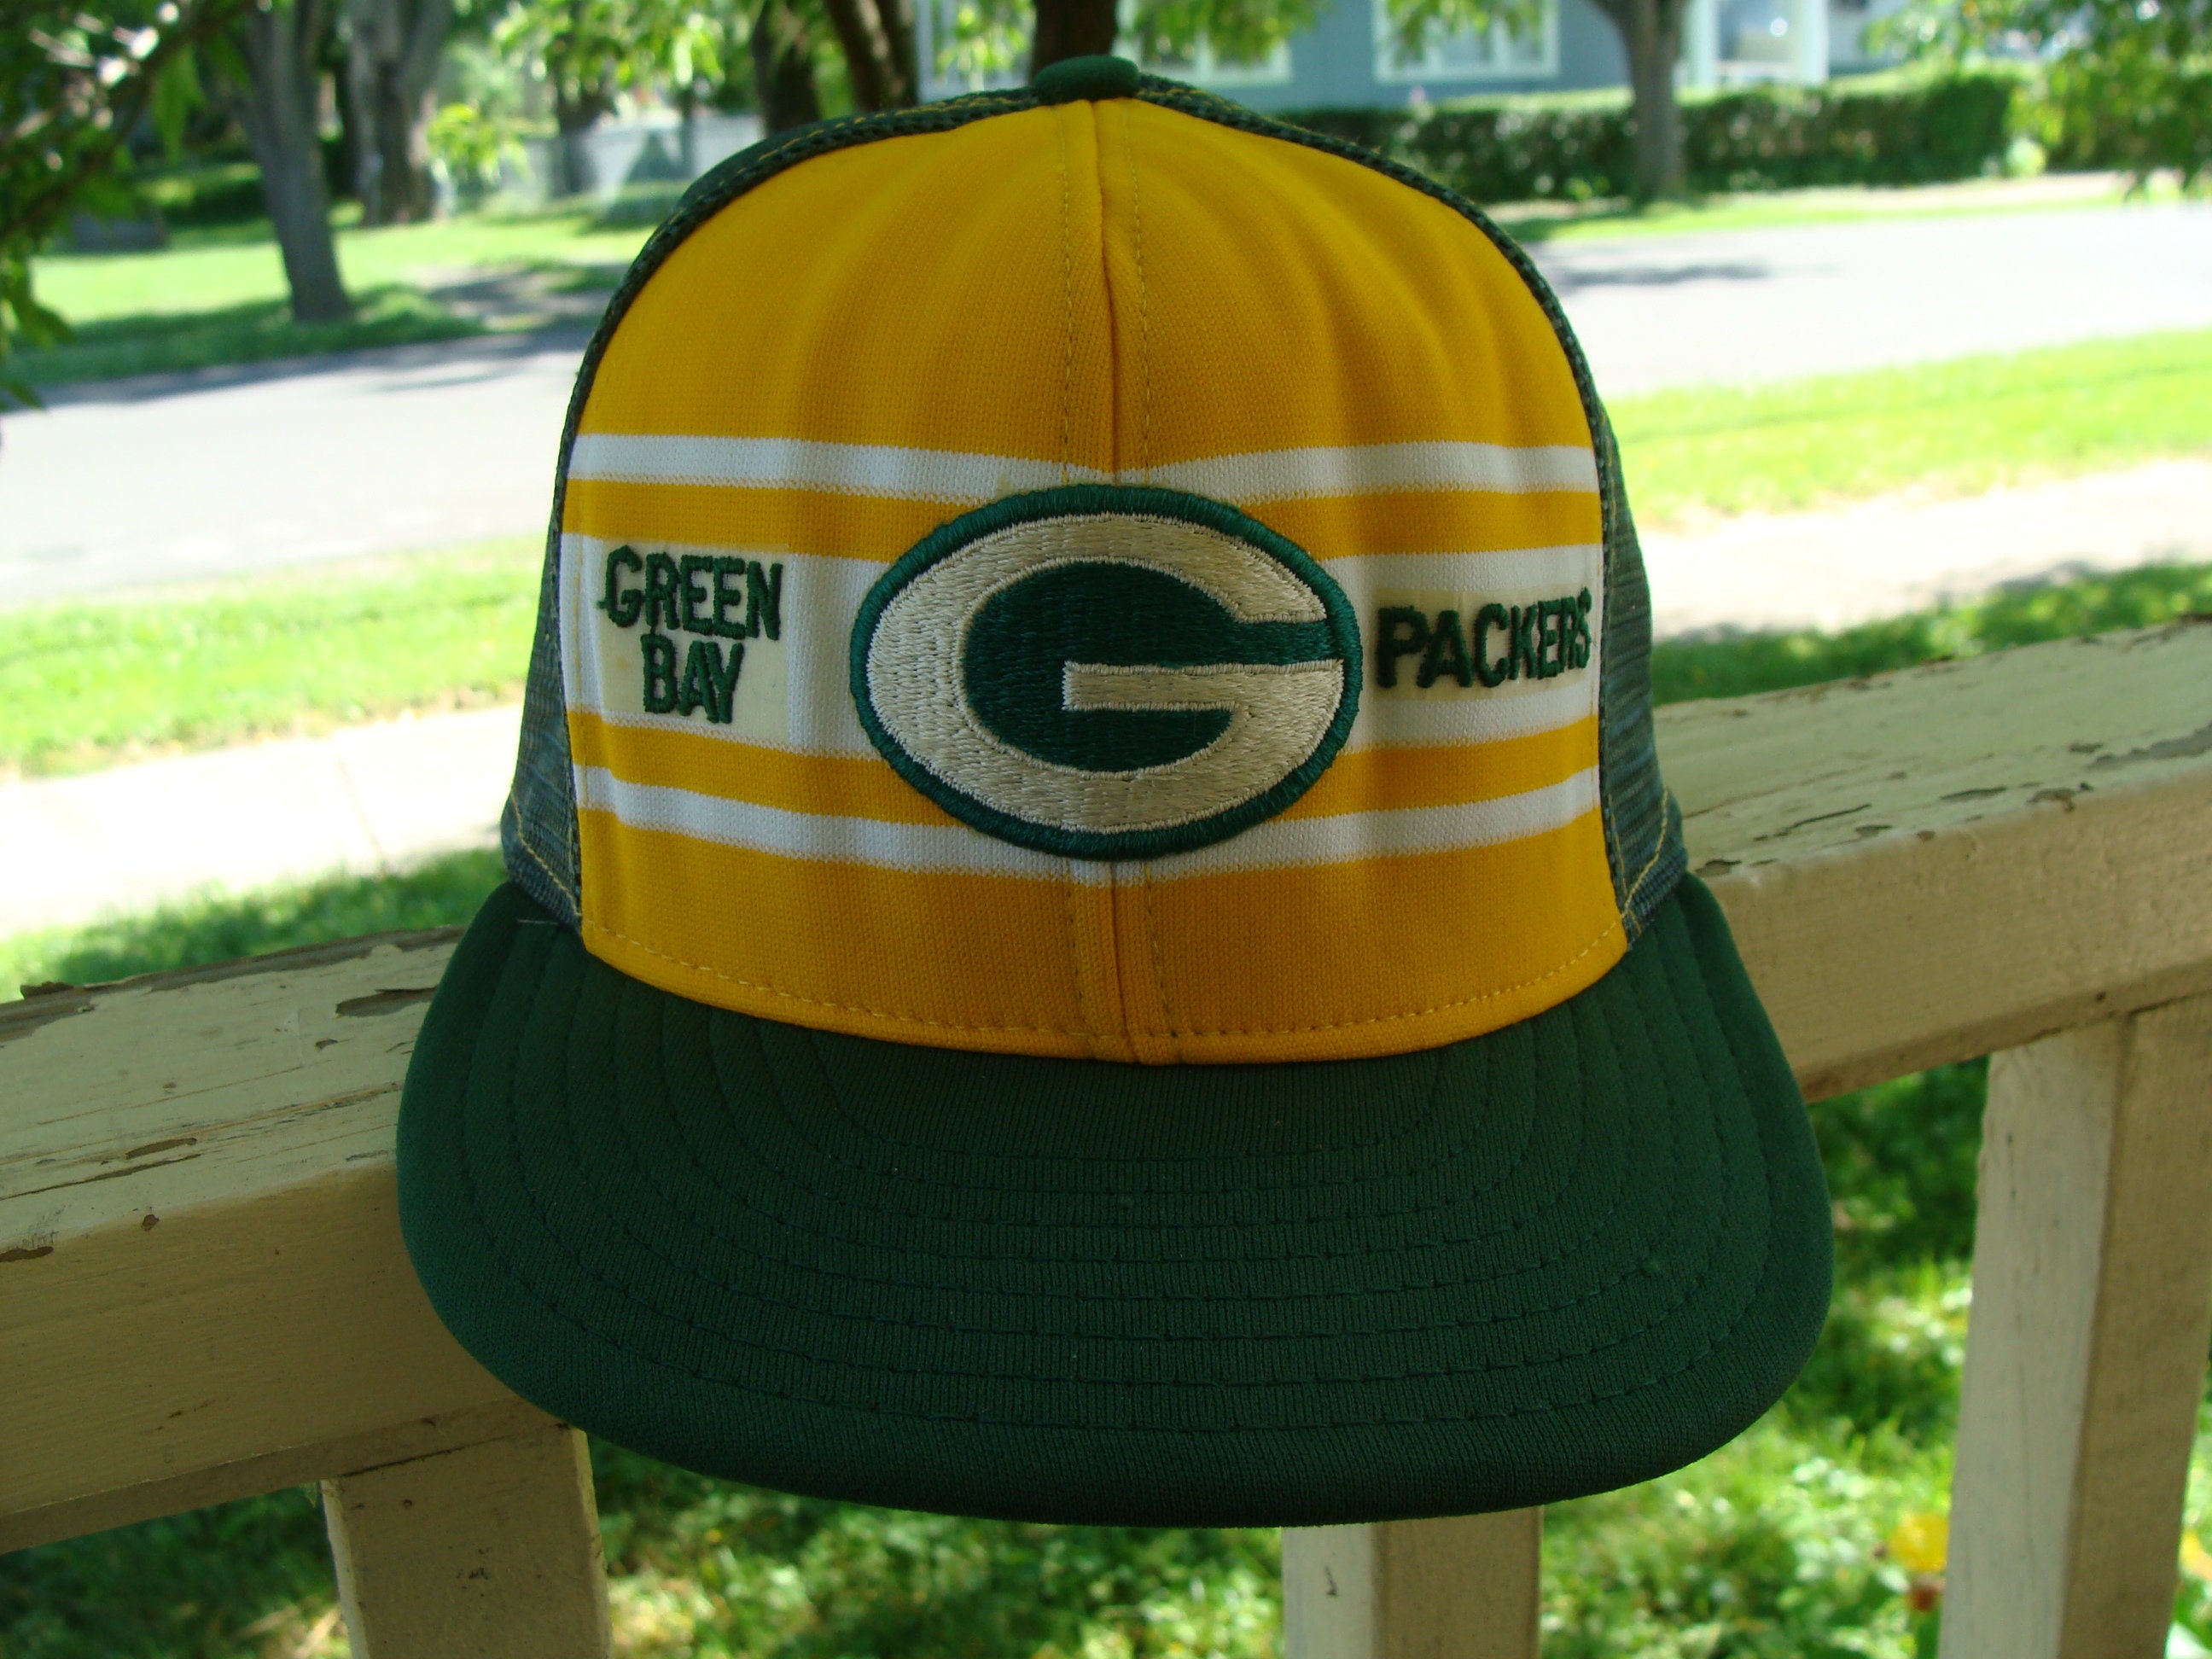 packers fitted hat